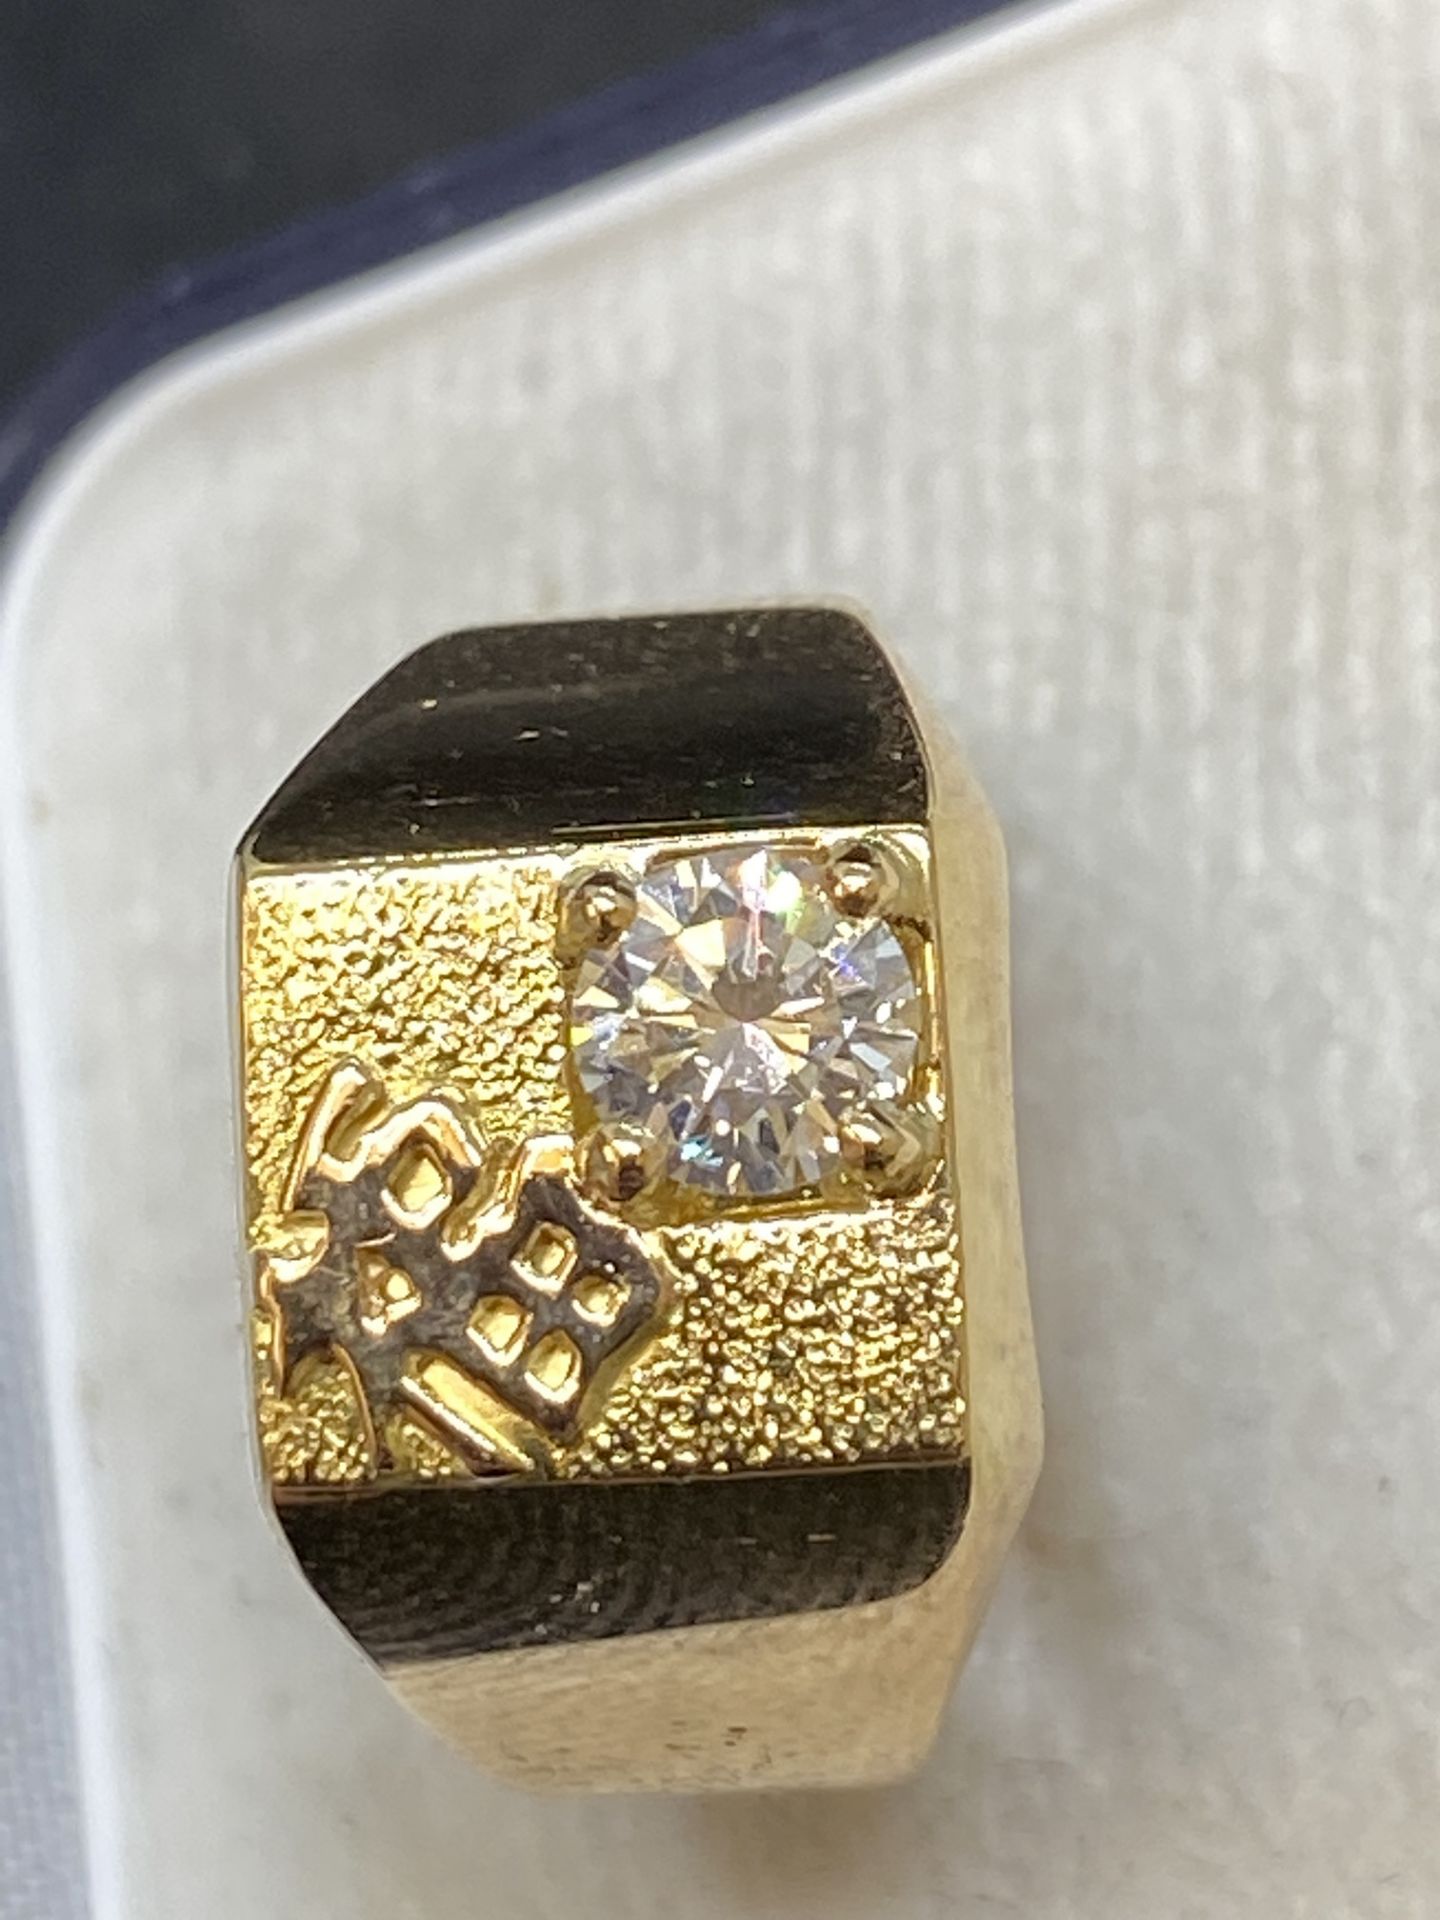 YELLOW METAL CHINESE WRITING WITH 0.60ct G/VS DIAMOND SET RING - TESTED AS 18ct GOLD - 9 GRAMS - Image 3 of 5